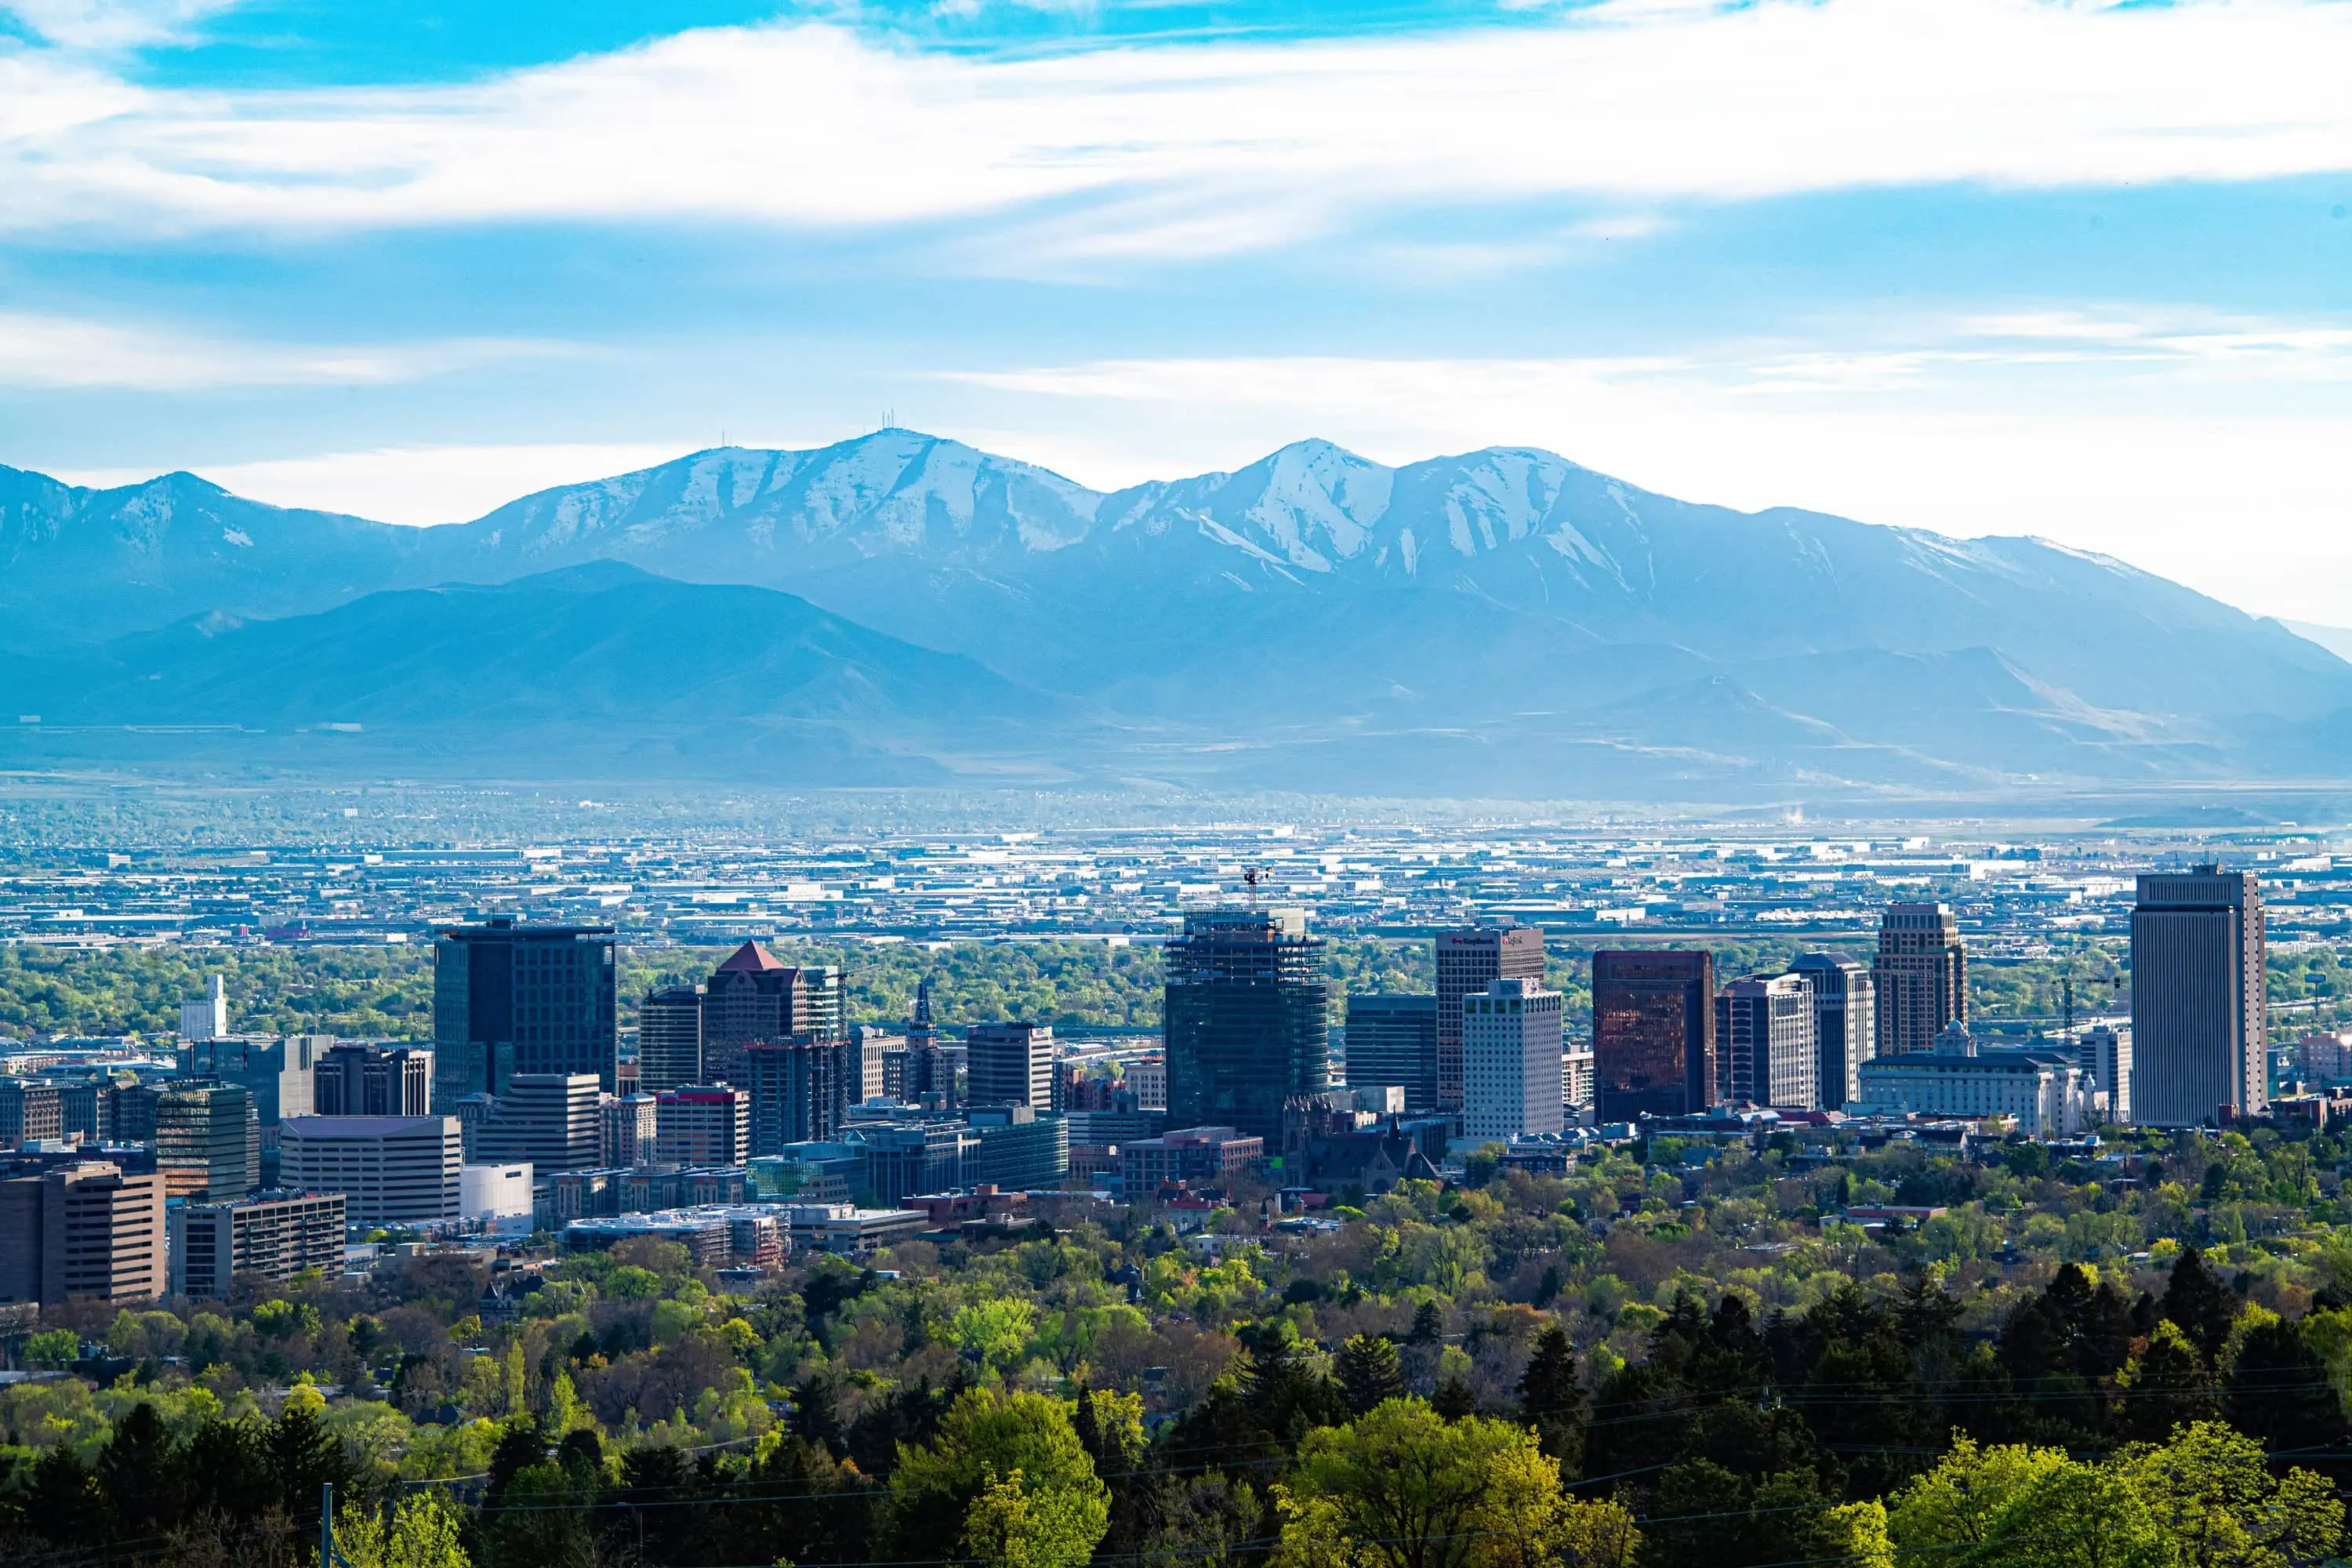 Skyline of Salt Lake City with businesses equipped with security cameras